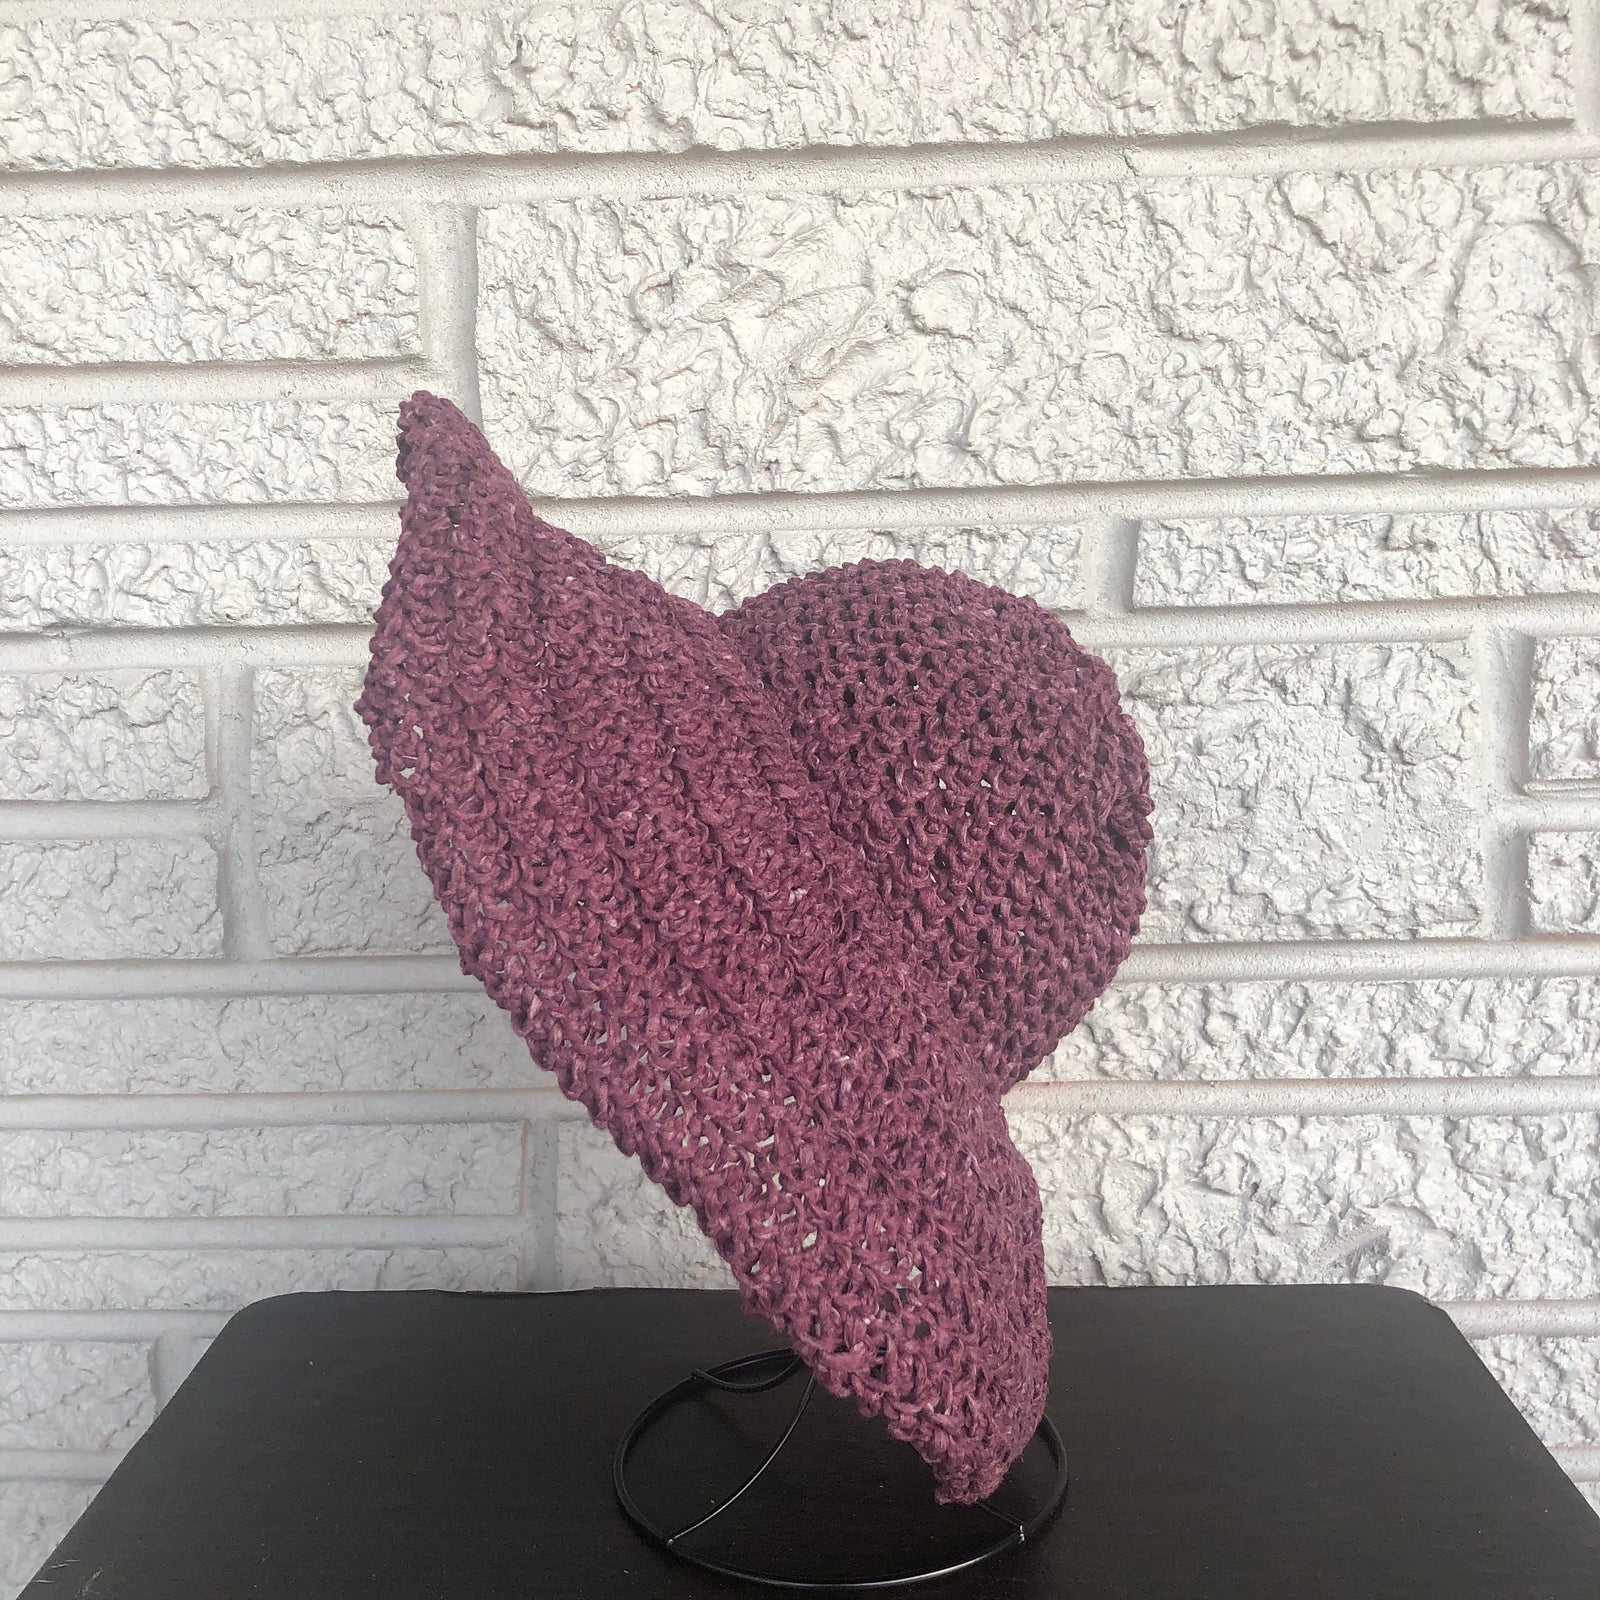 Loom Knit Current Situation Beach Hat – BOHLD Loom Knitting